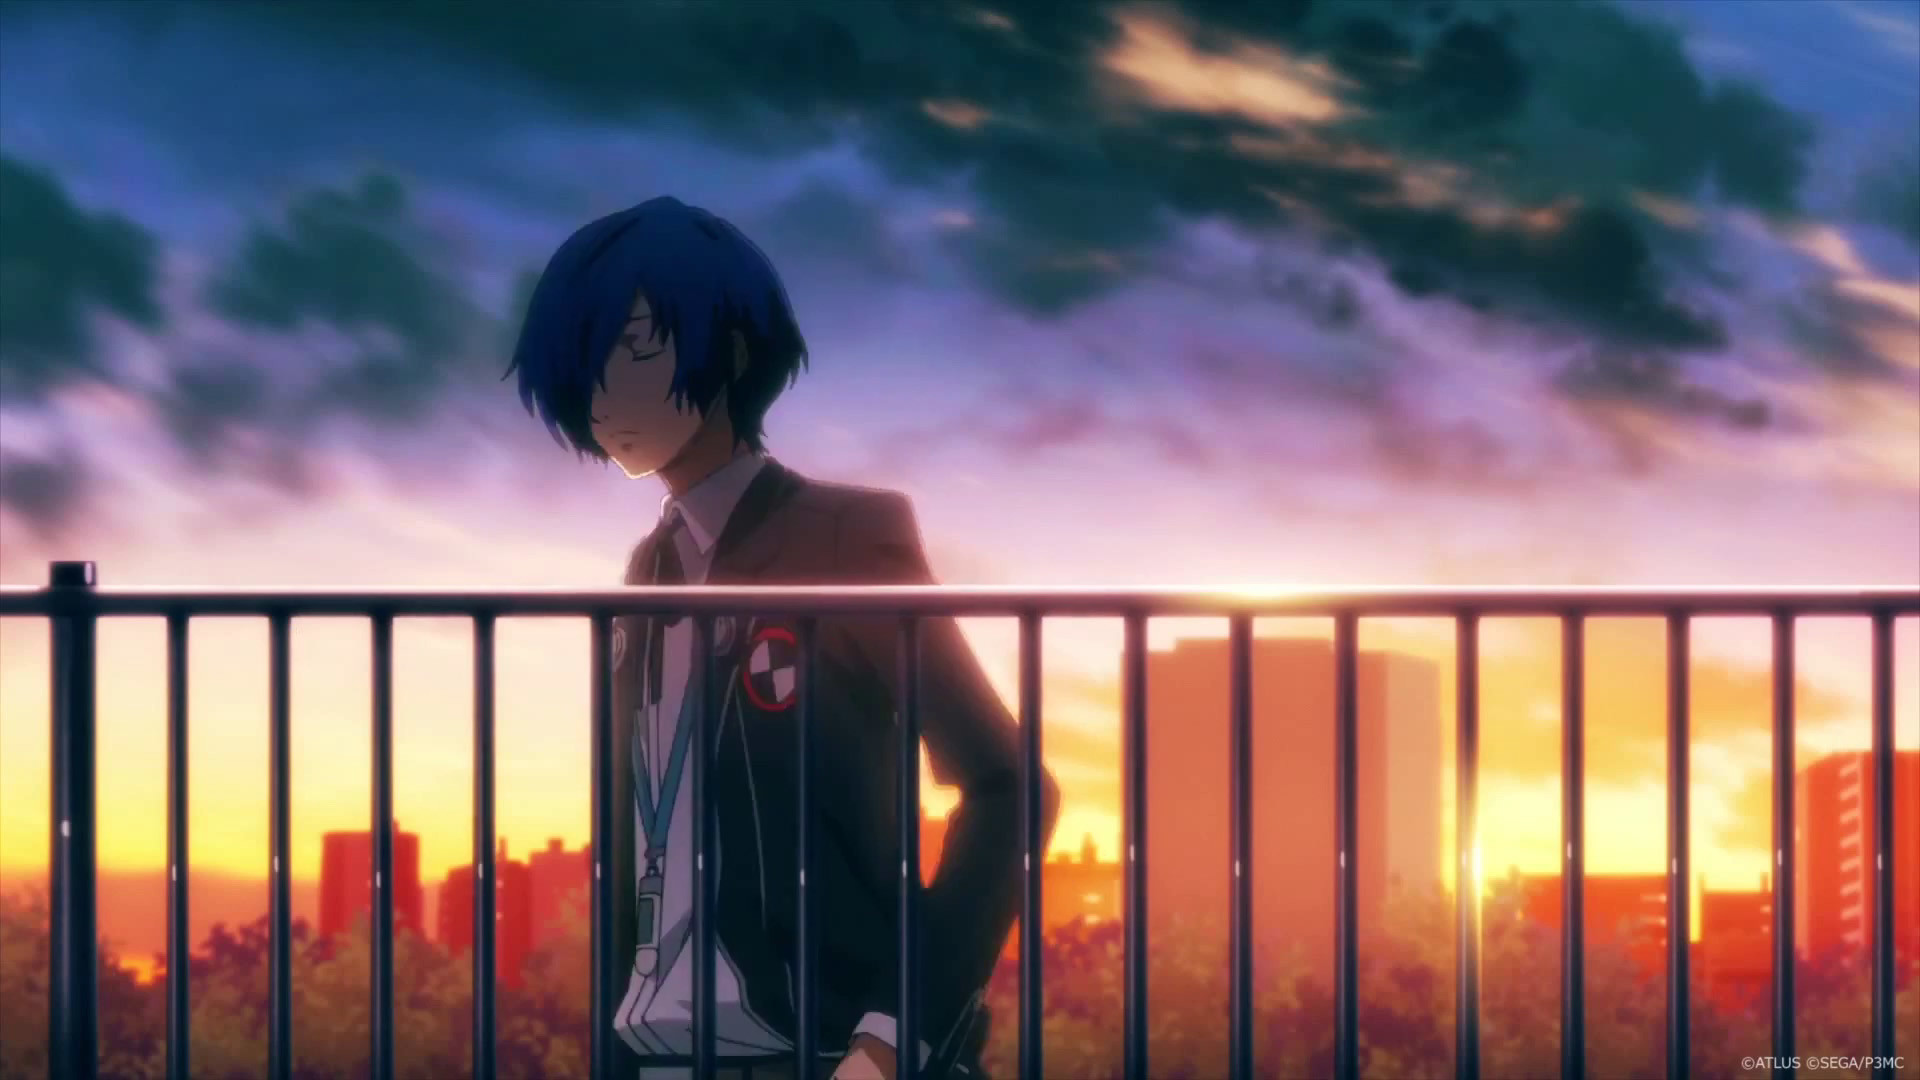 1920x1080 vlcsnap-2015-03-06-14h15m28s159 Persona 3 The Movie 3 Falling Down